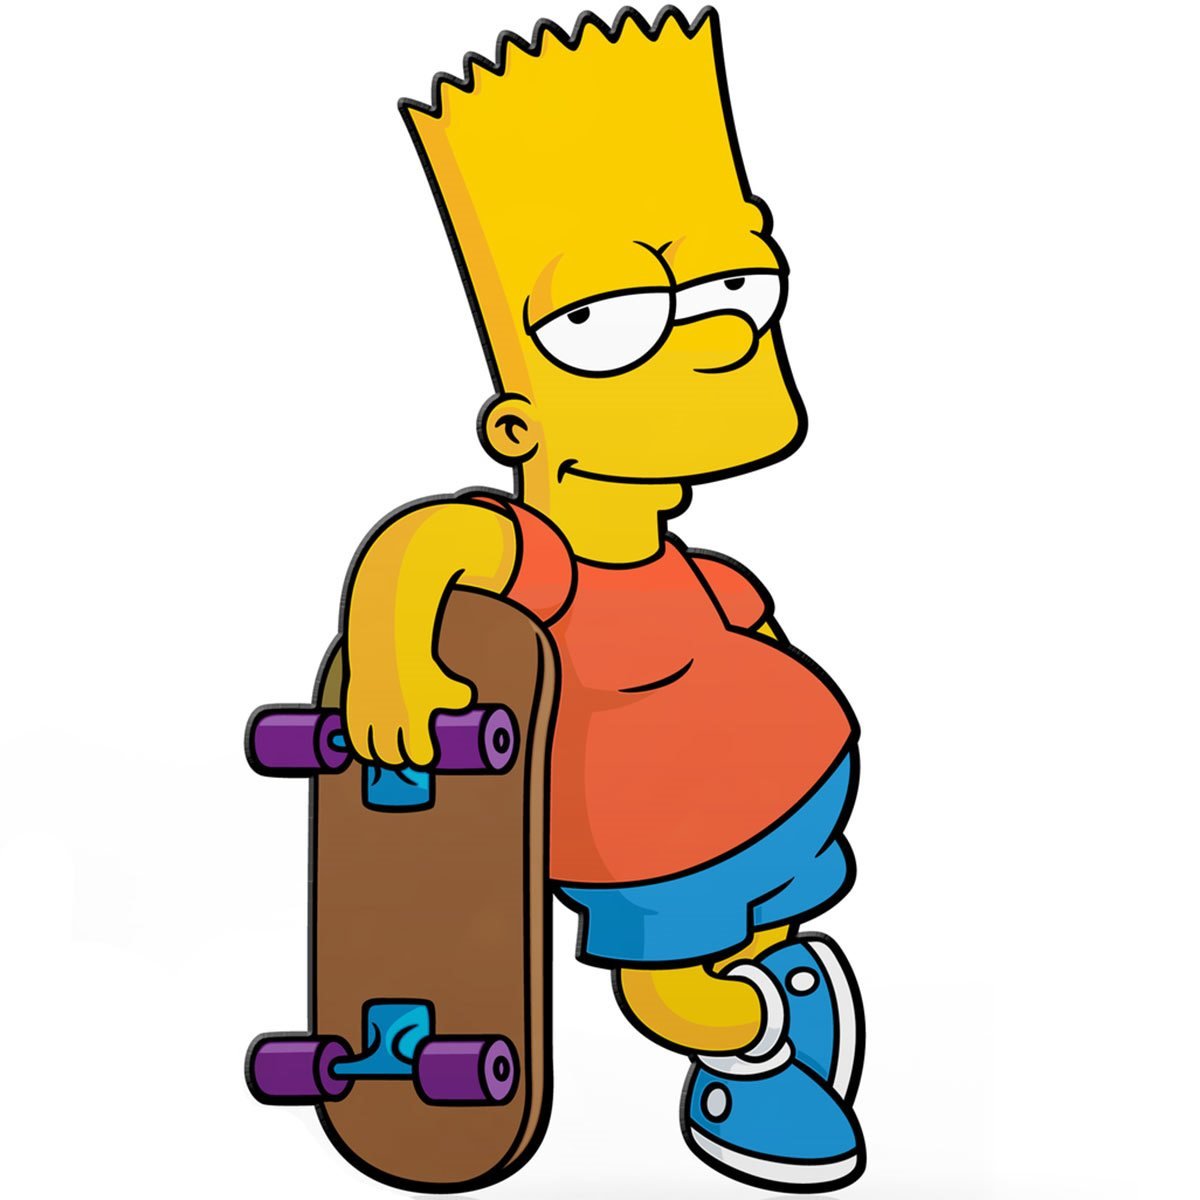 Deserve Newness barn The Simpsons Bart Simpson with Skateboard FiGPiN Classic 3-Inch Enamel Pin